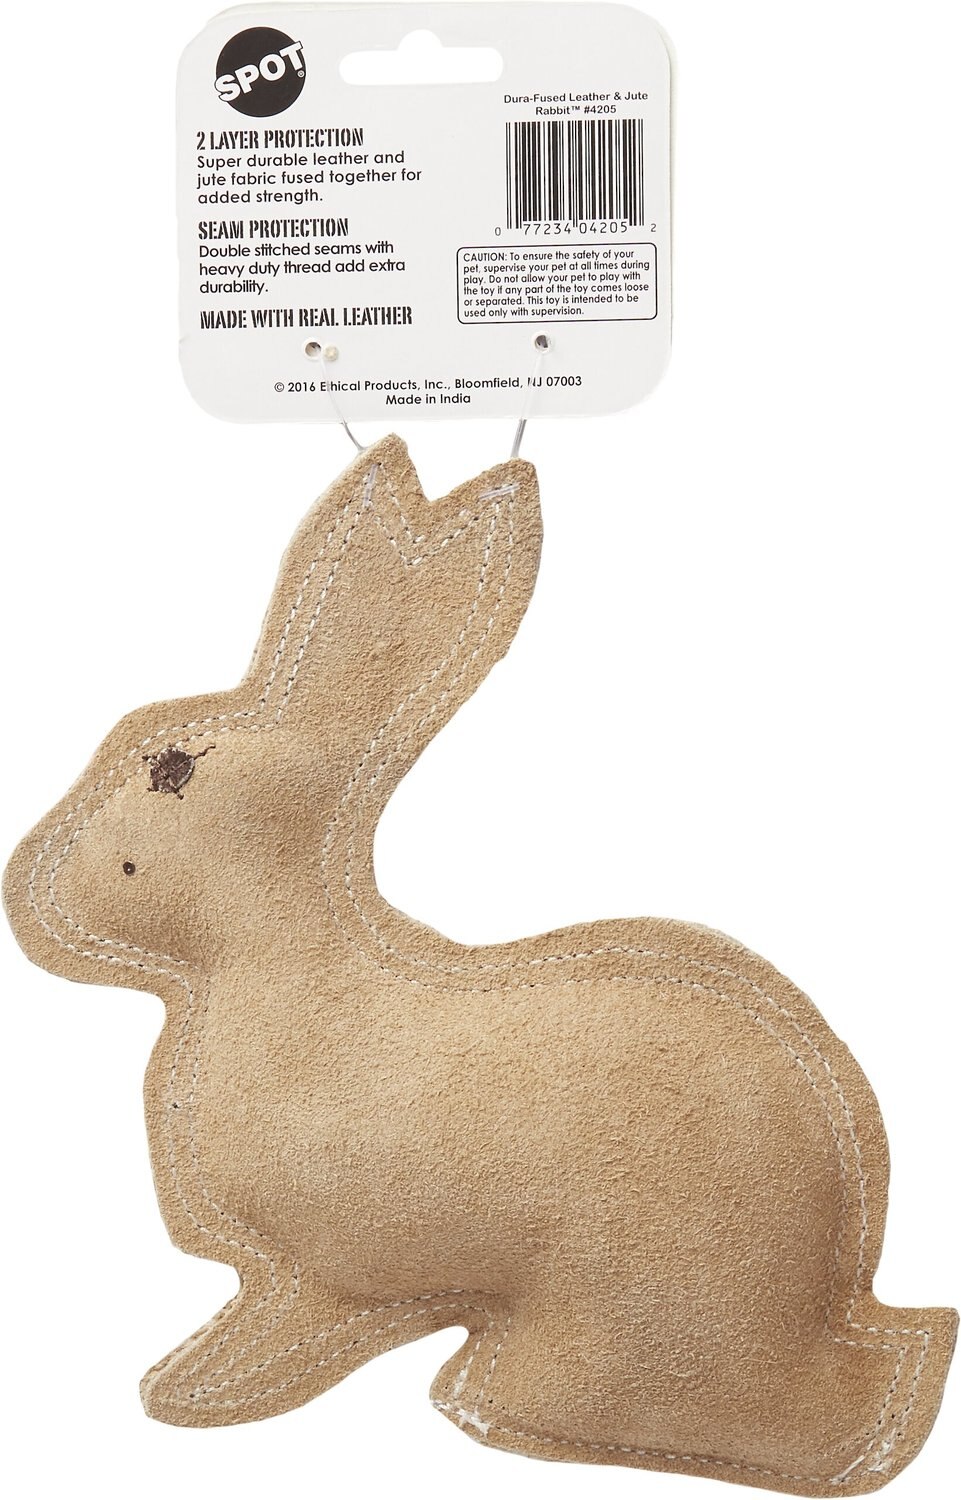 Ethical Pet Dura-Fused 7.5-Inch Leather Dog Toy Fоur Расk Rabbit Small